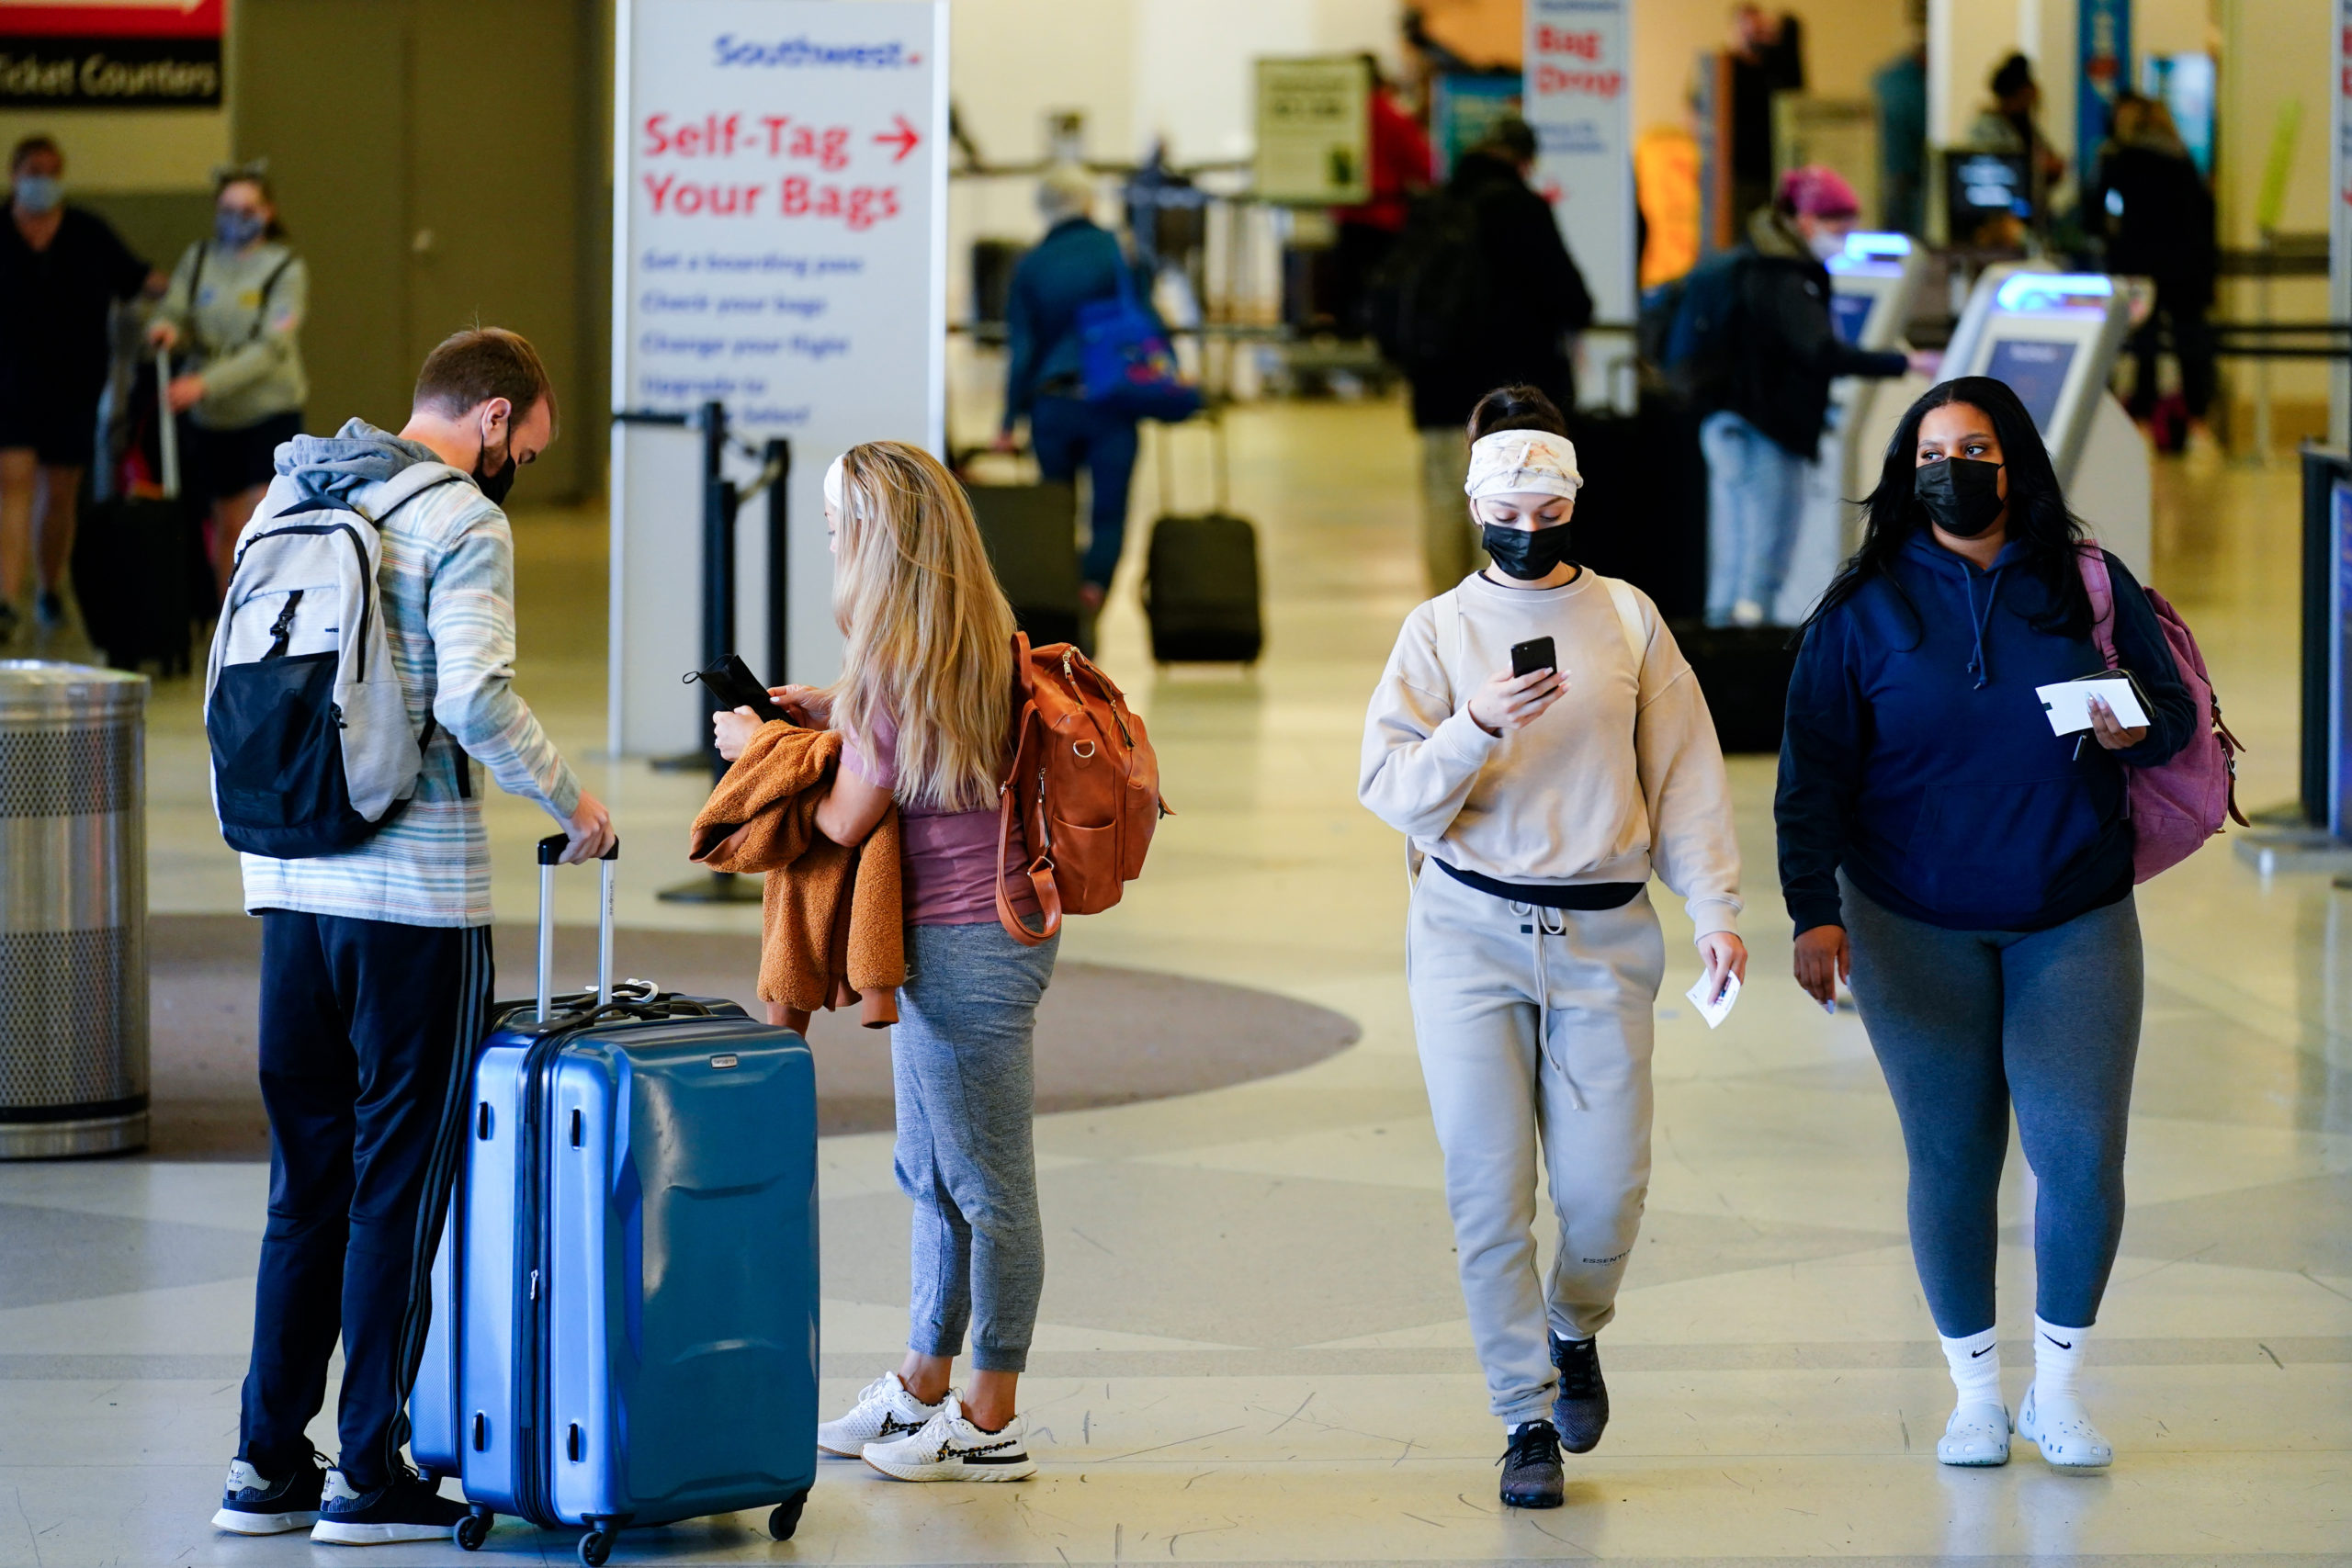 ravelers wearing masks intended to help stop the spread of the coronavirus move about a terminal at the Philadelphia International Airport on April 19, 2022.